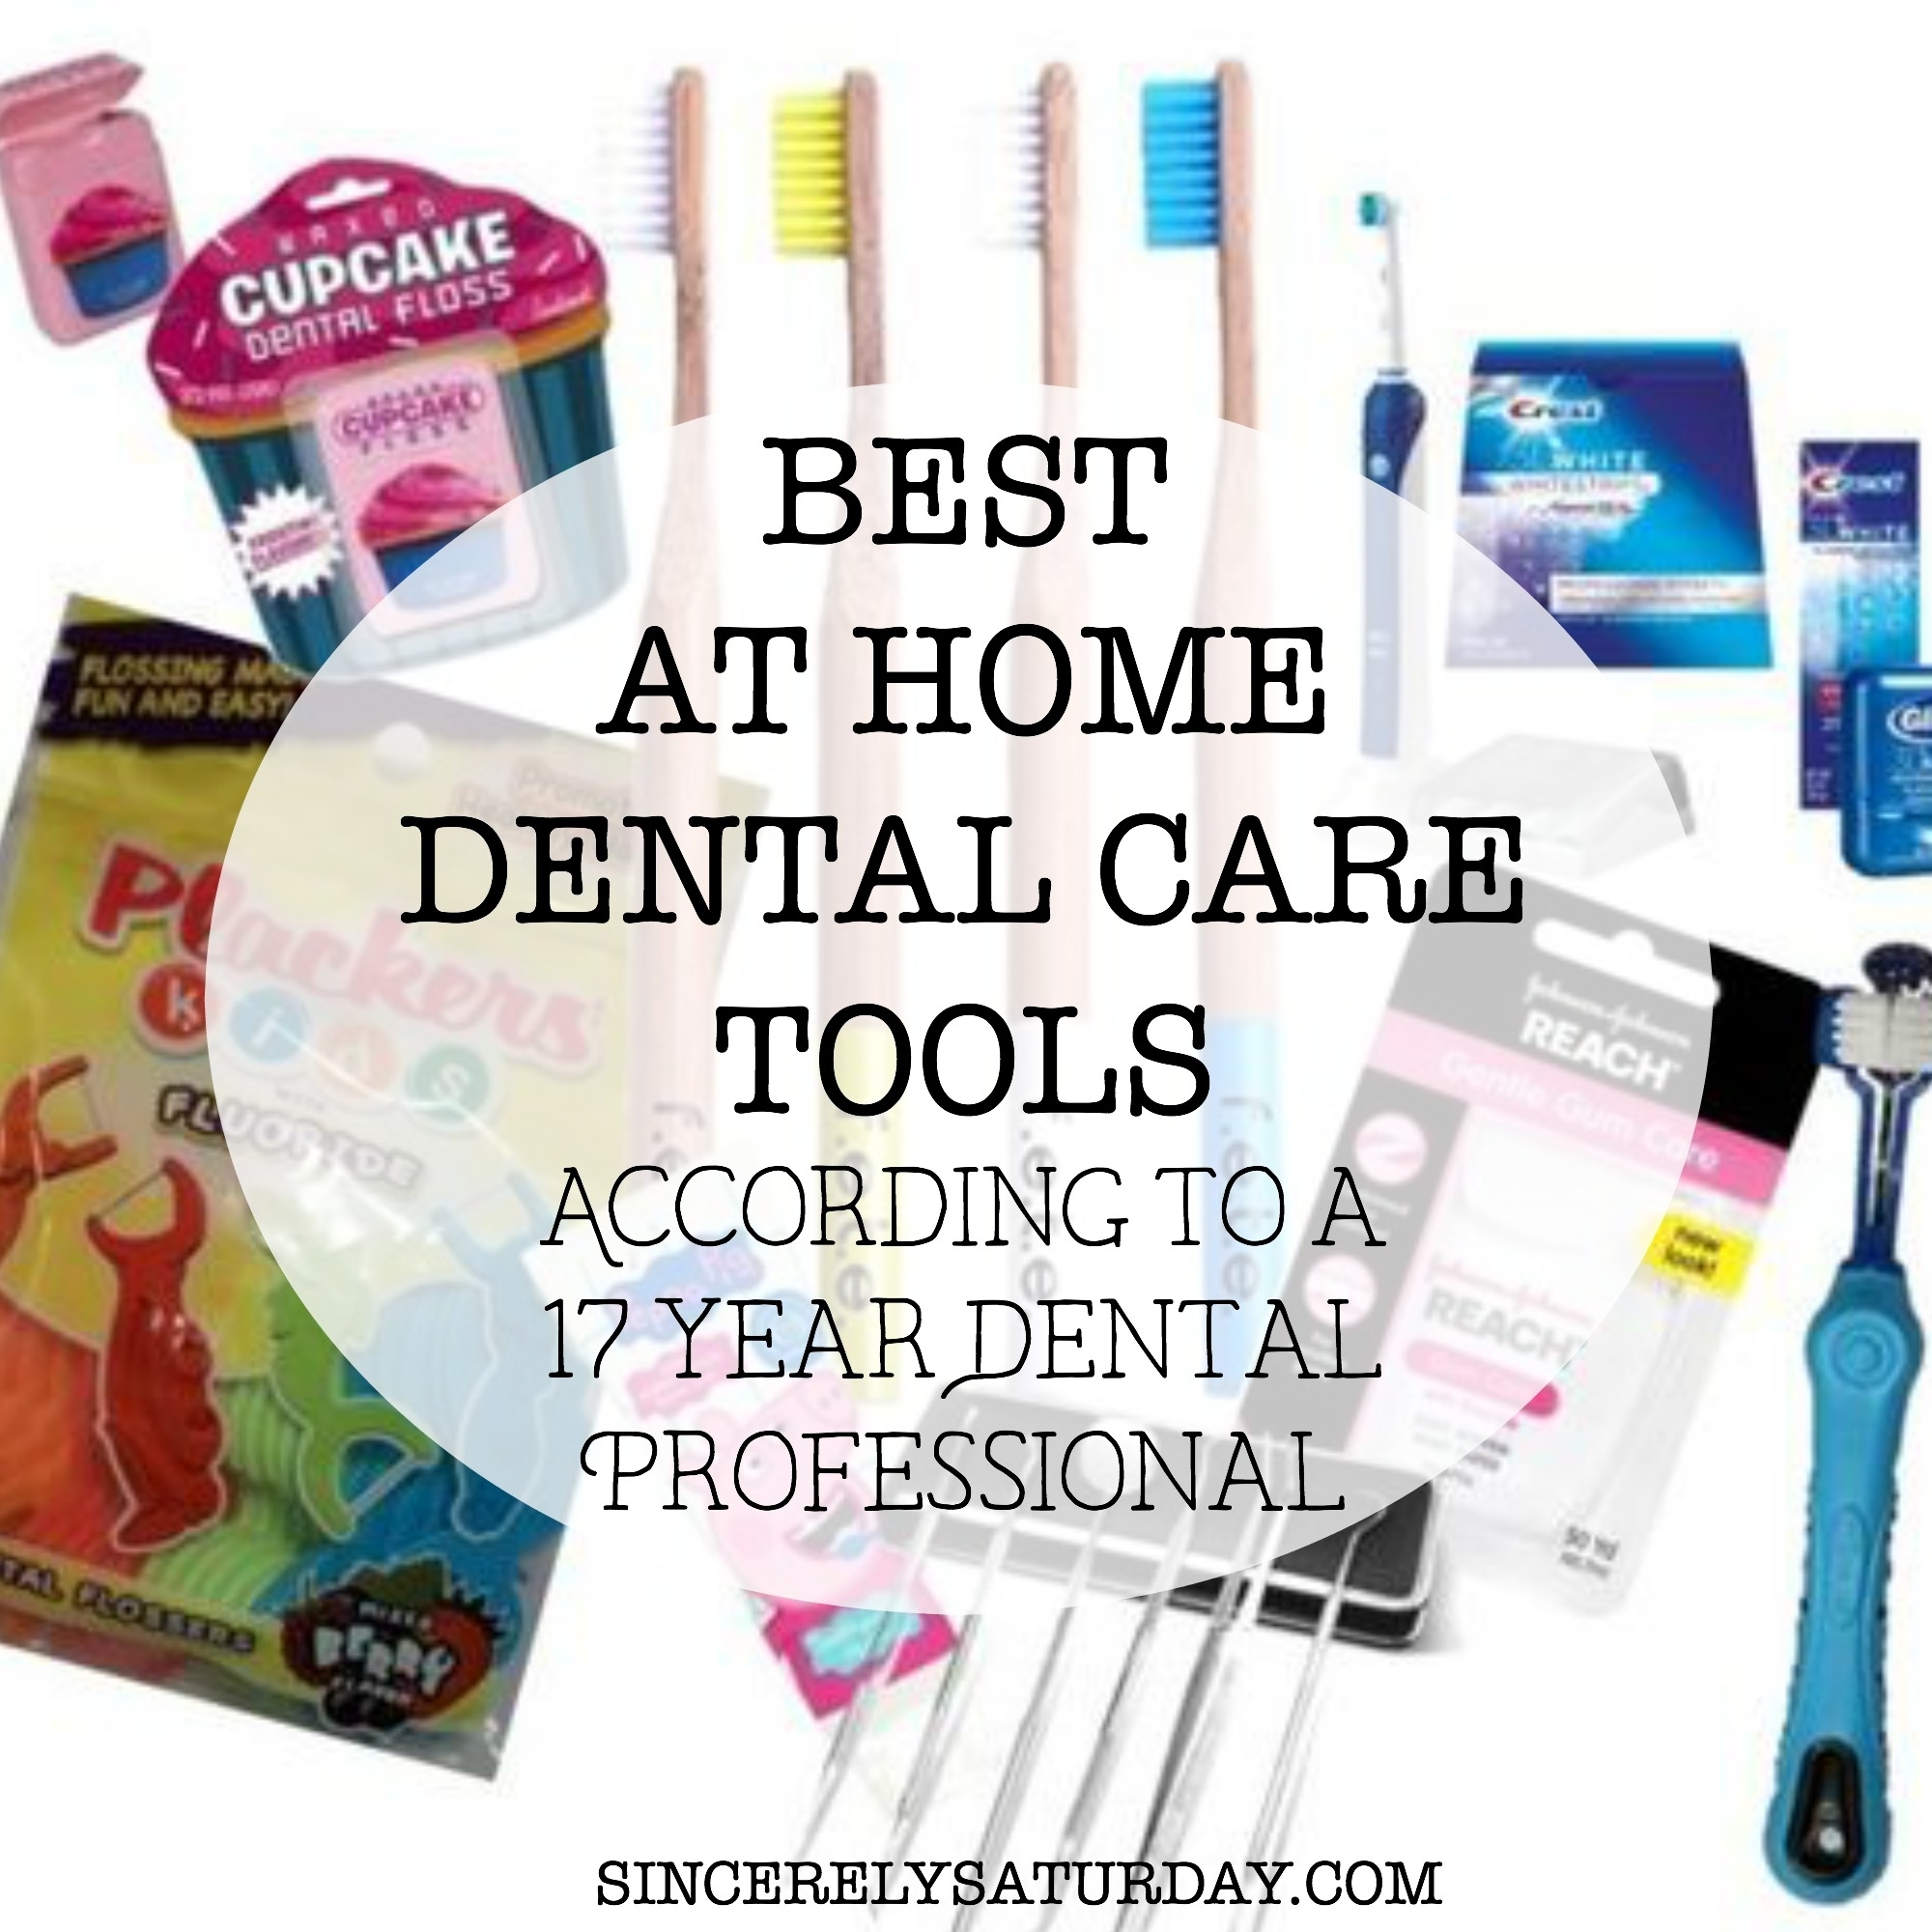 BEST AT HOME DENTAL TOOLS: ACCORDING TO A 17 YEAR DENTAL PROFESSIONAL - WISH LIST WEDNESDAY 16